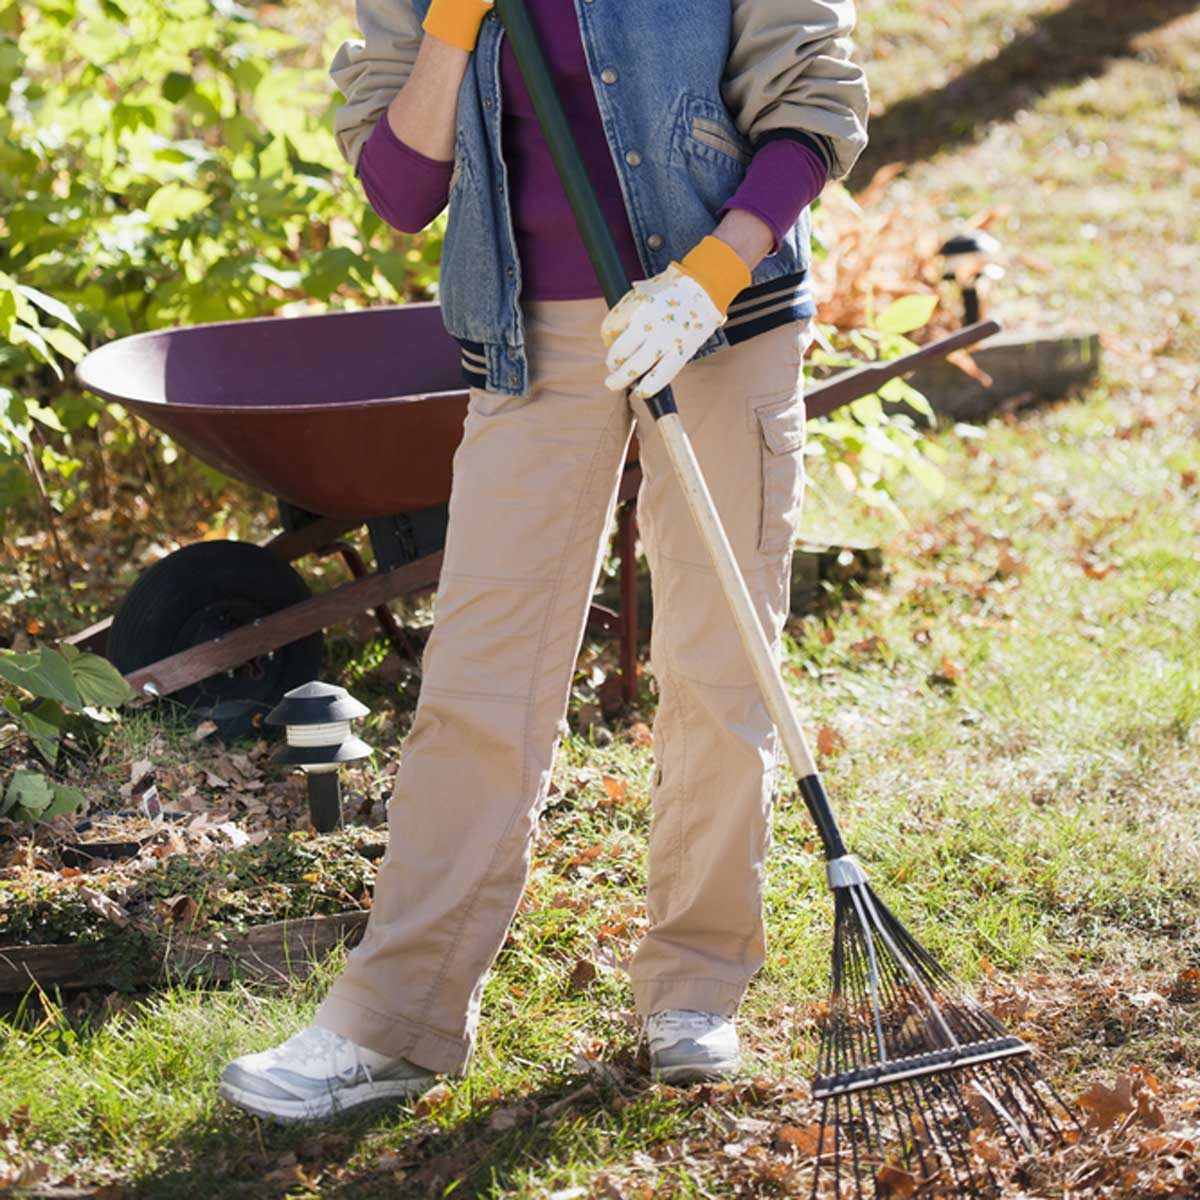 20 Bad Spring Yard Work Habits You Need to Stop Doing